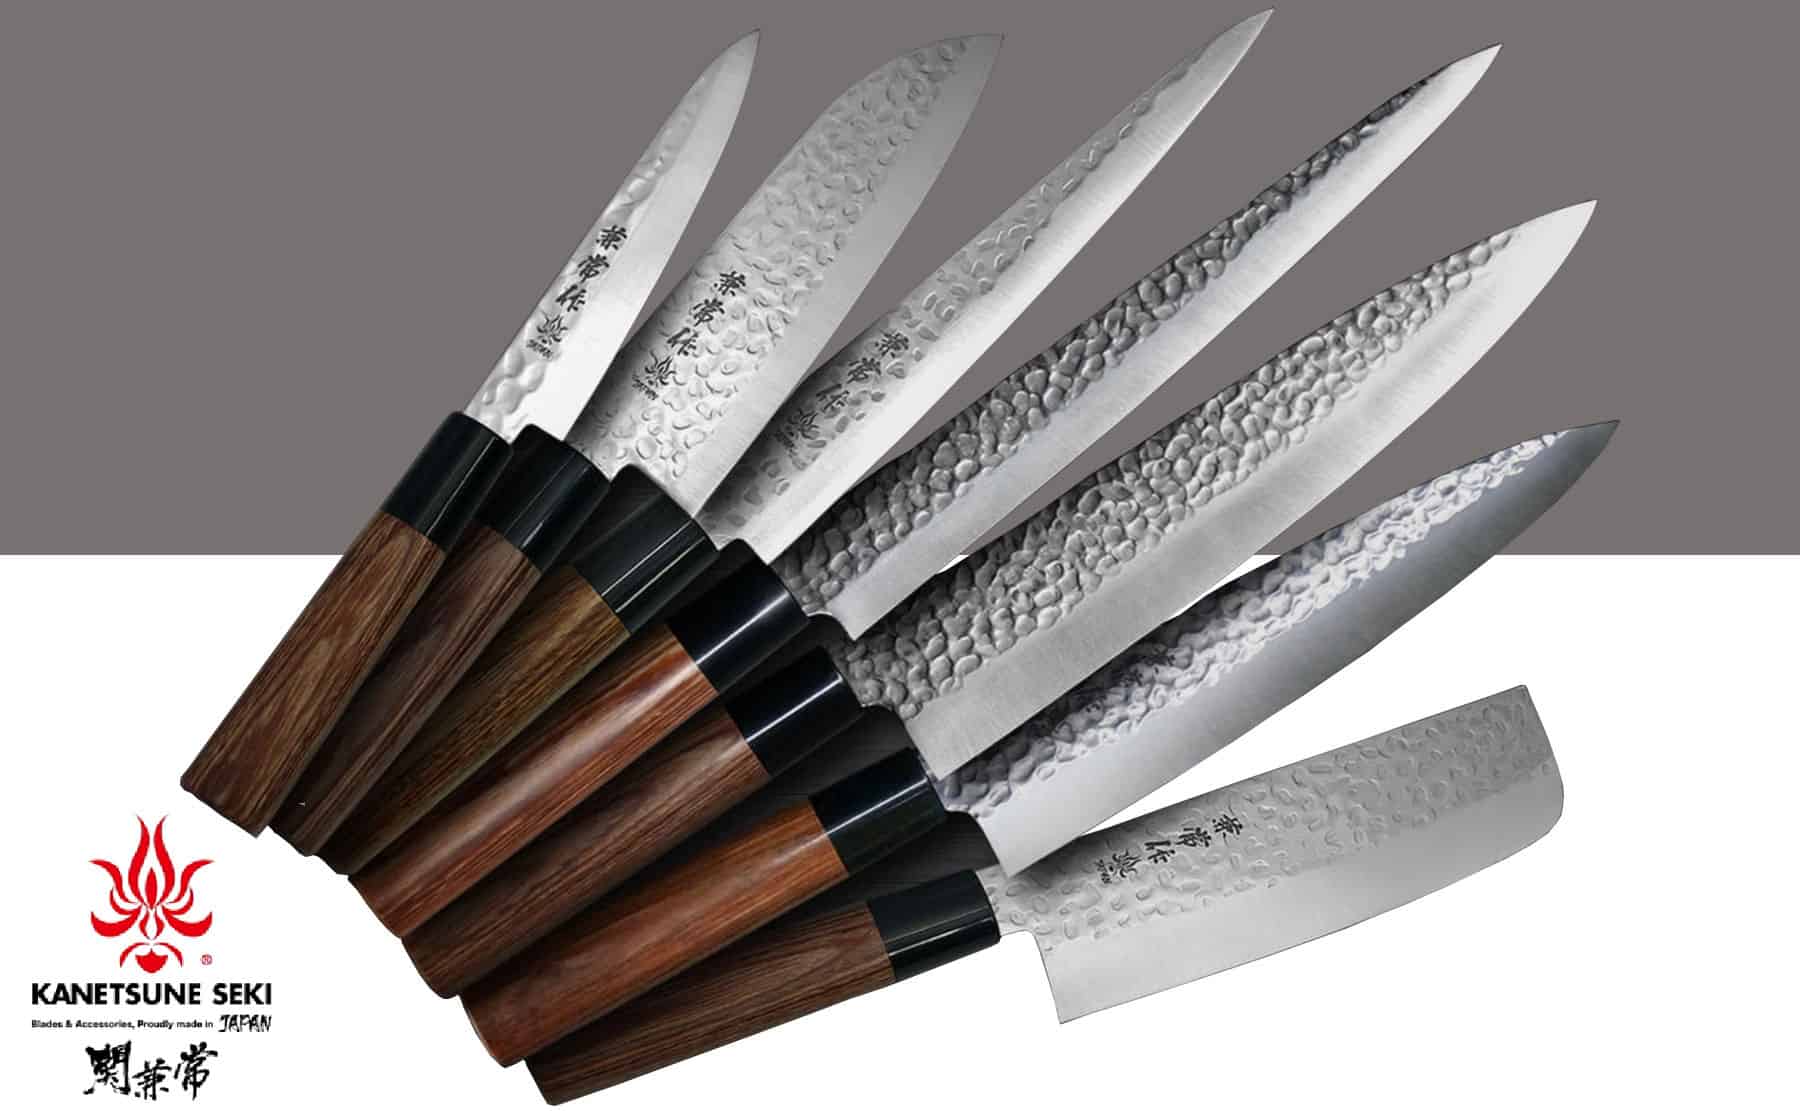 Kanetsune makes some of the best affordable Japanese knife sets available. This 7-Piece KC-(50 set is one of our favorites.